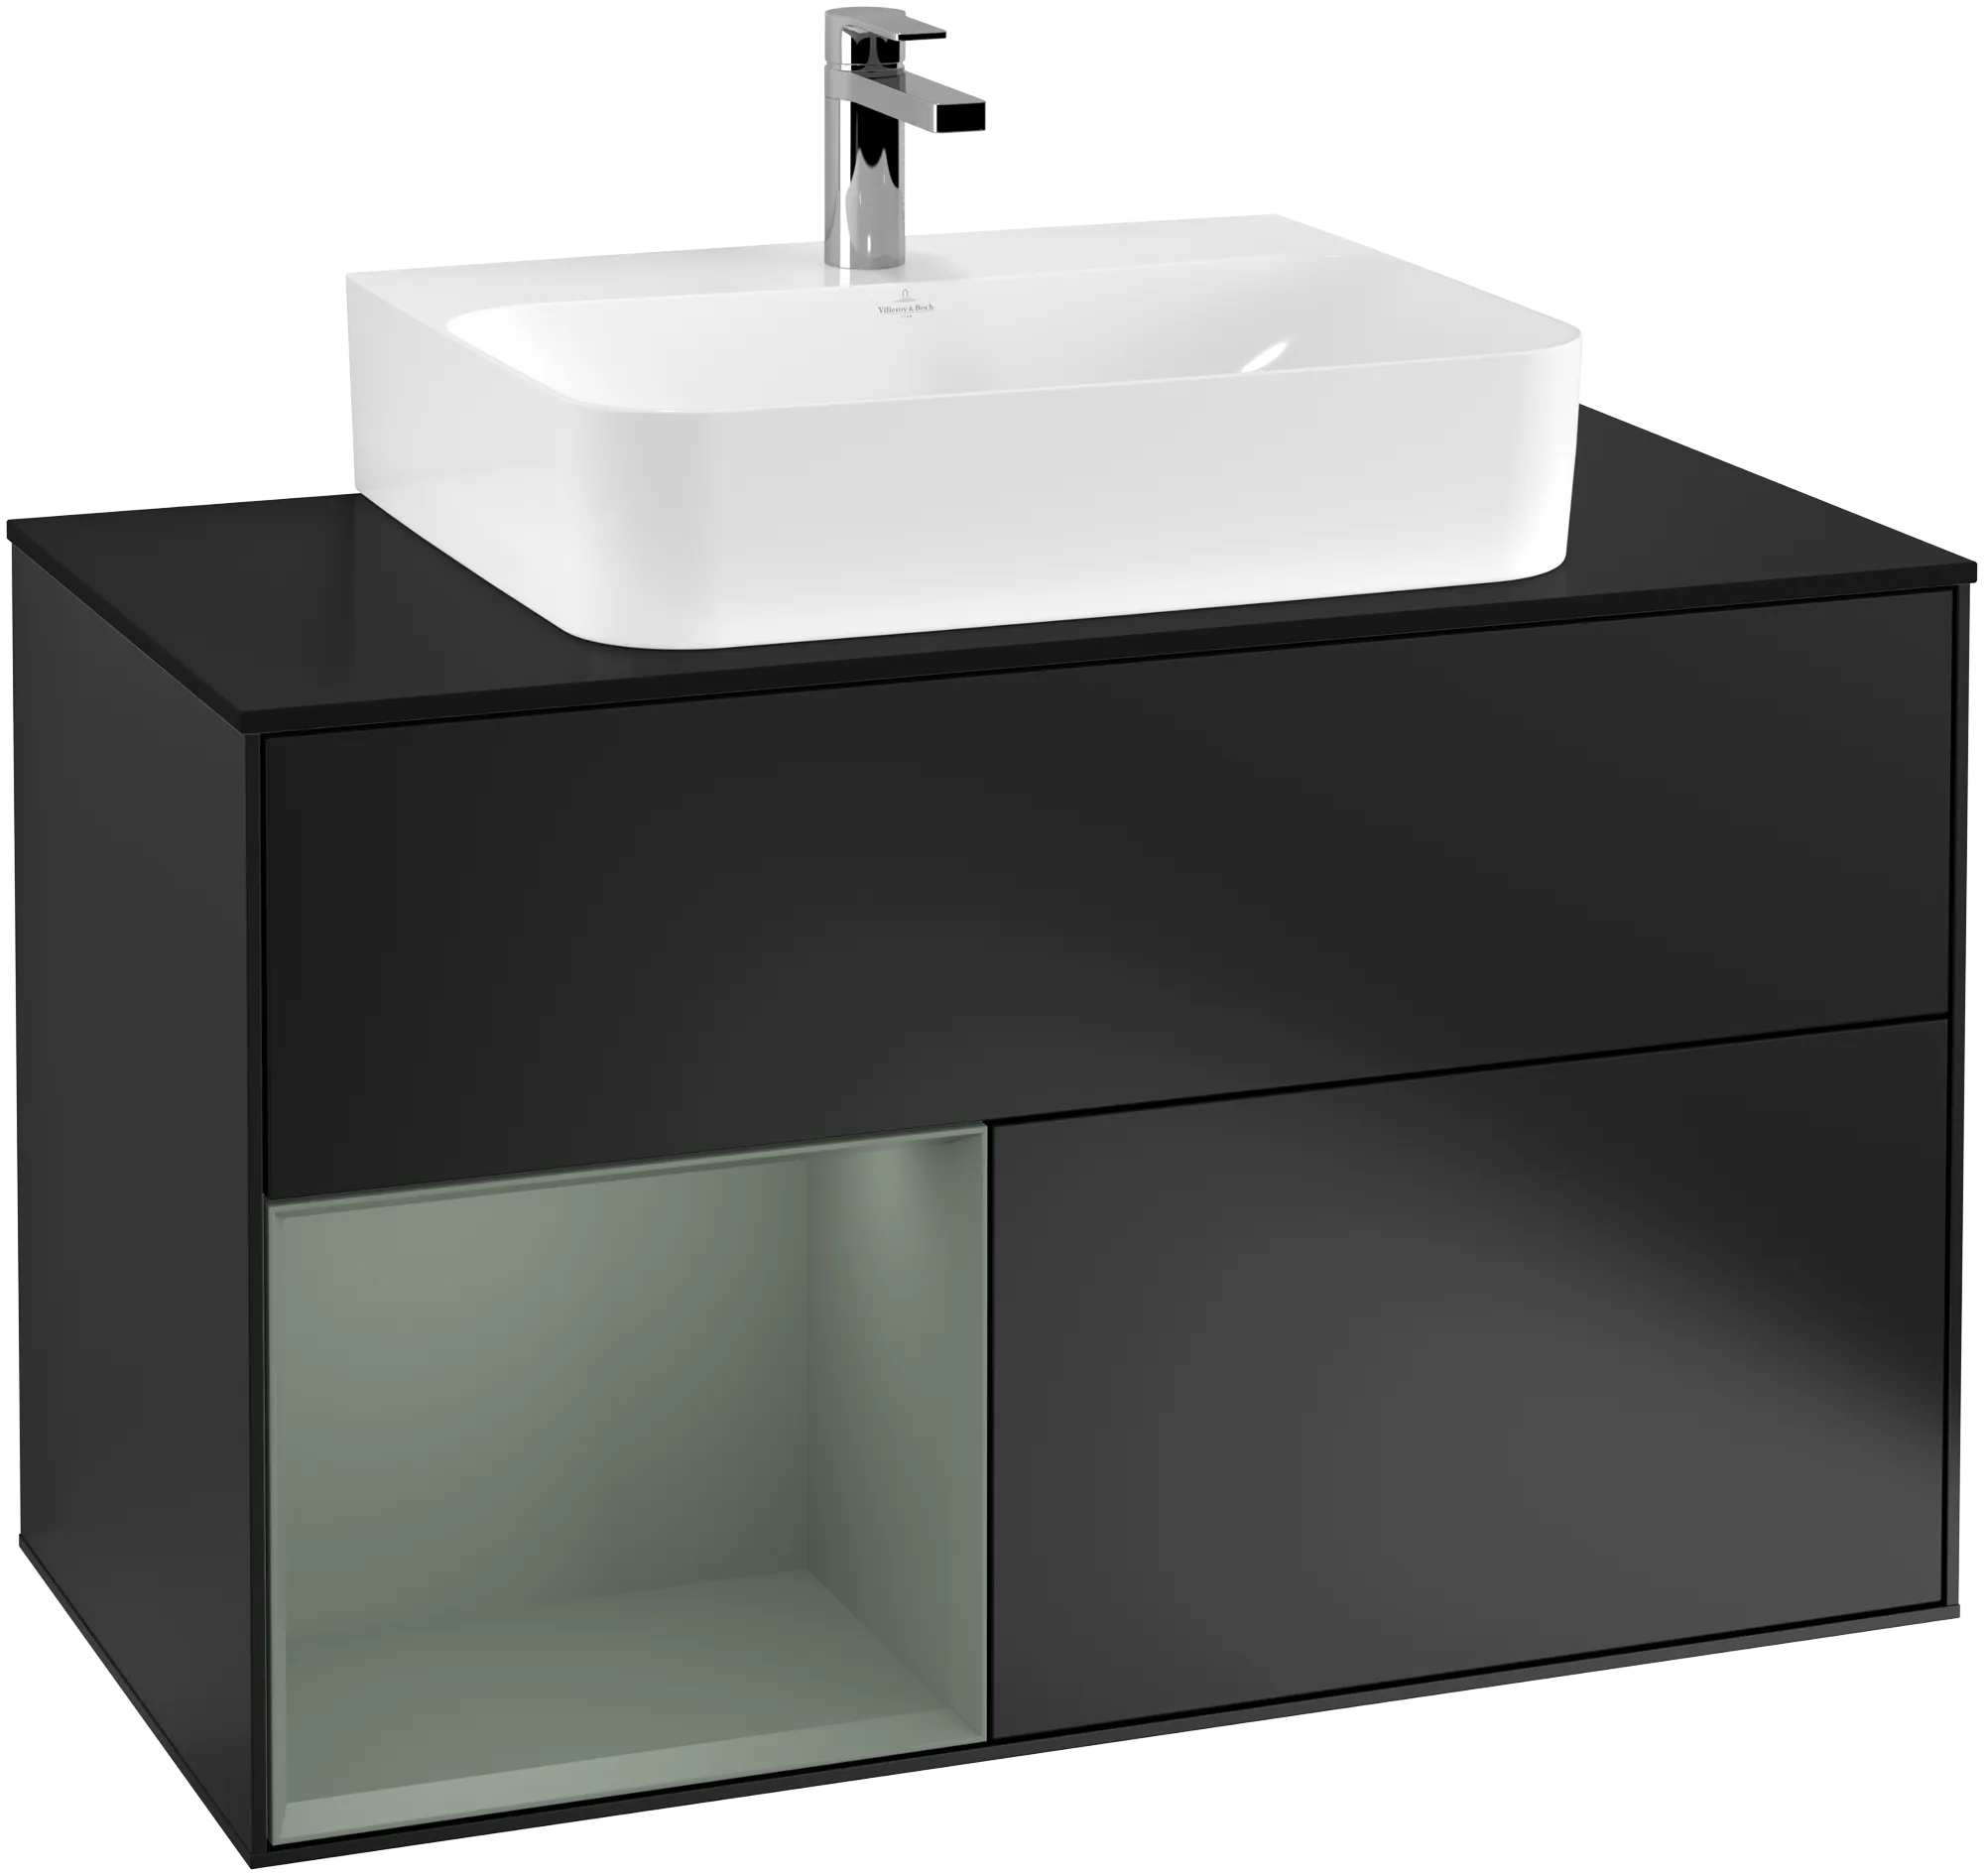 Obrázek VILLEROY BOCH Finion Vanity unit, with lighting, 2 pull-out compartments, 1000 x 603 x 501 mm, Black Matt Lacquer / Olive Matt Lacquer / Glass Black Matt #G112GMPD